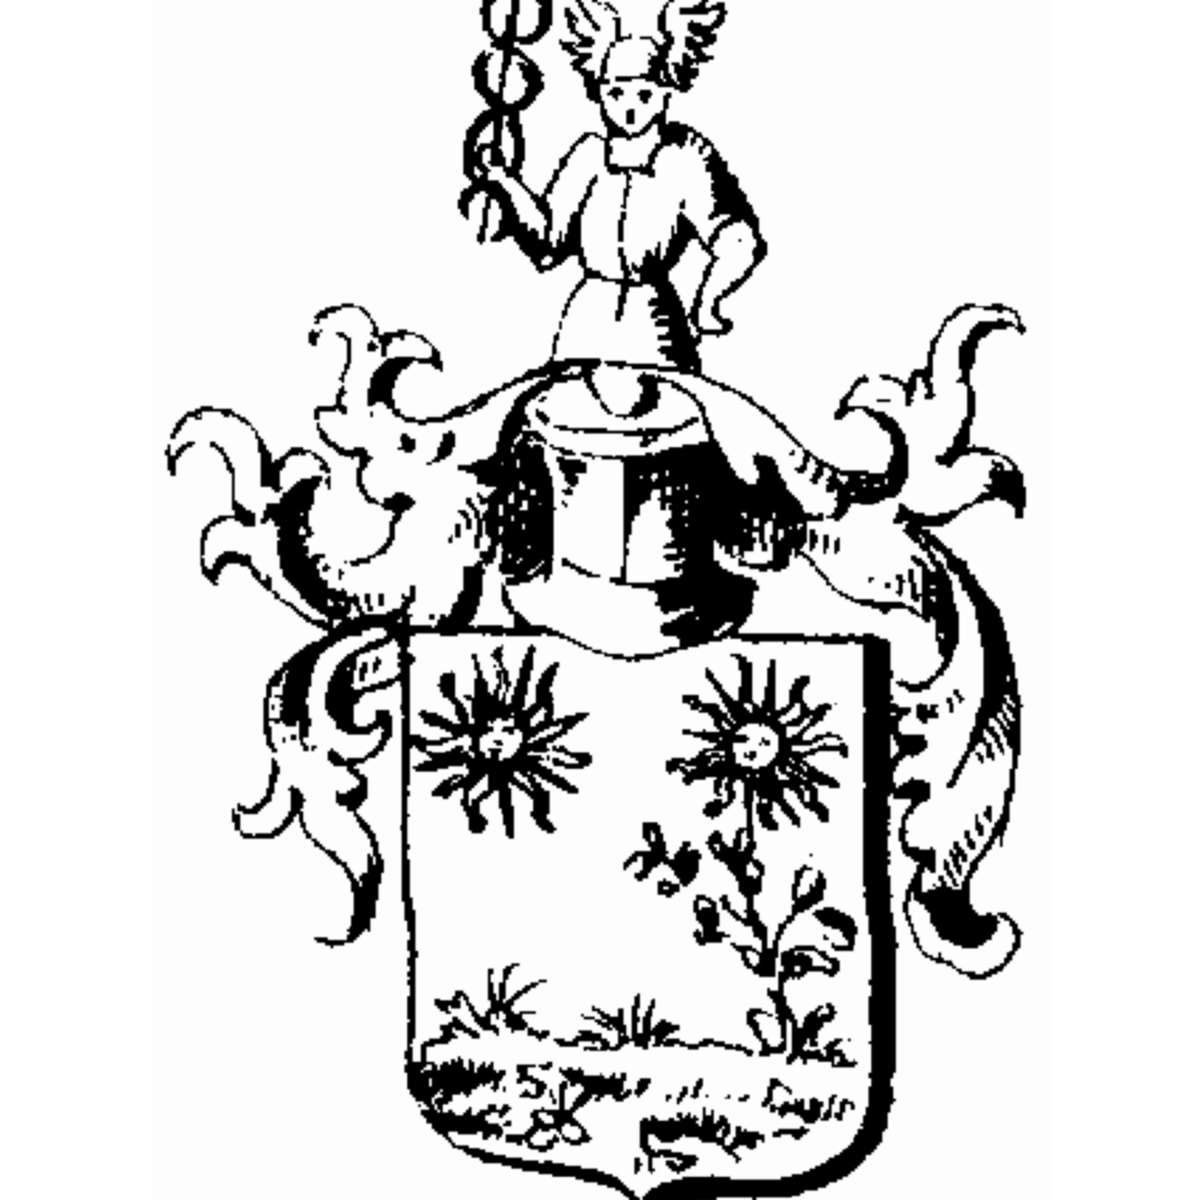 Coat of arms of family Ort